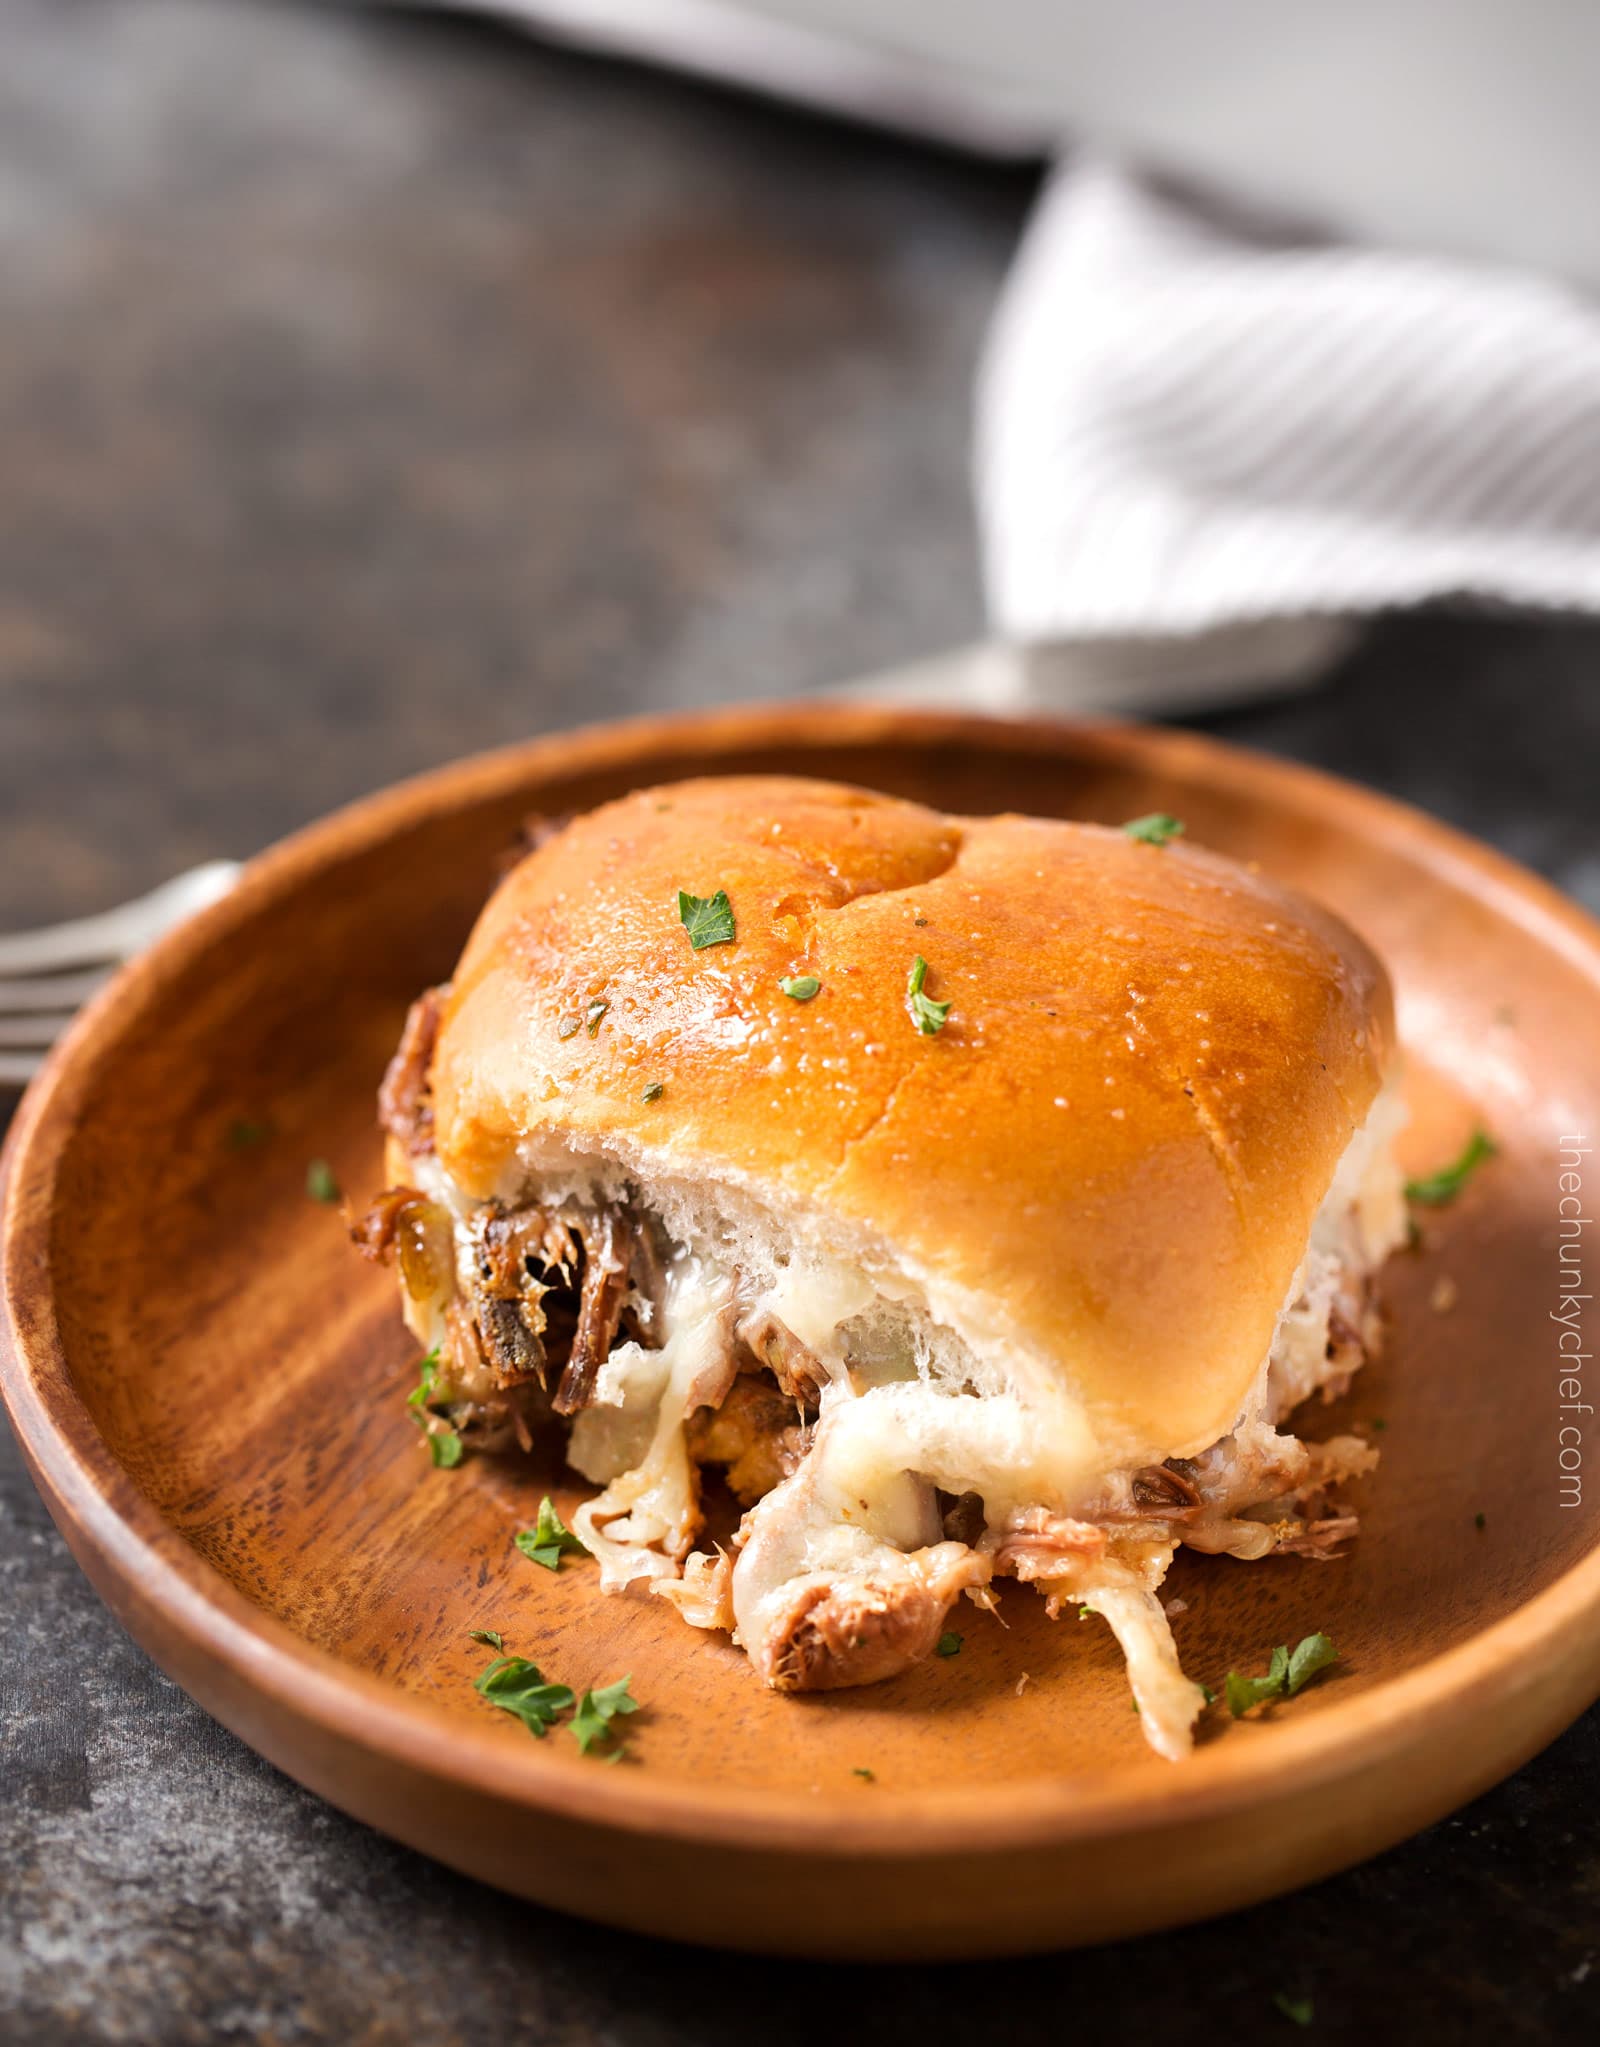 Baked Italian Beef Sliders | Slider buns are piled high with shredded Italian beef and gooey provolone cheese, brushed with melted garlic butter and baked until gooey and mouthwatering! | http://thechunkychef.com